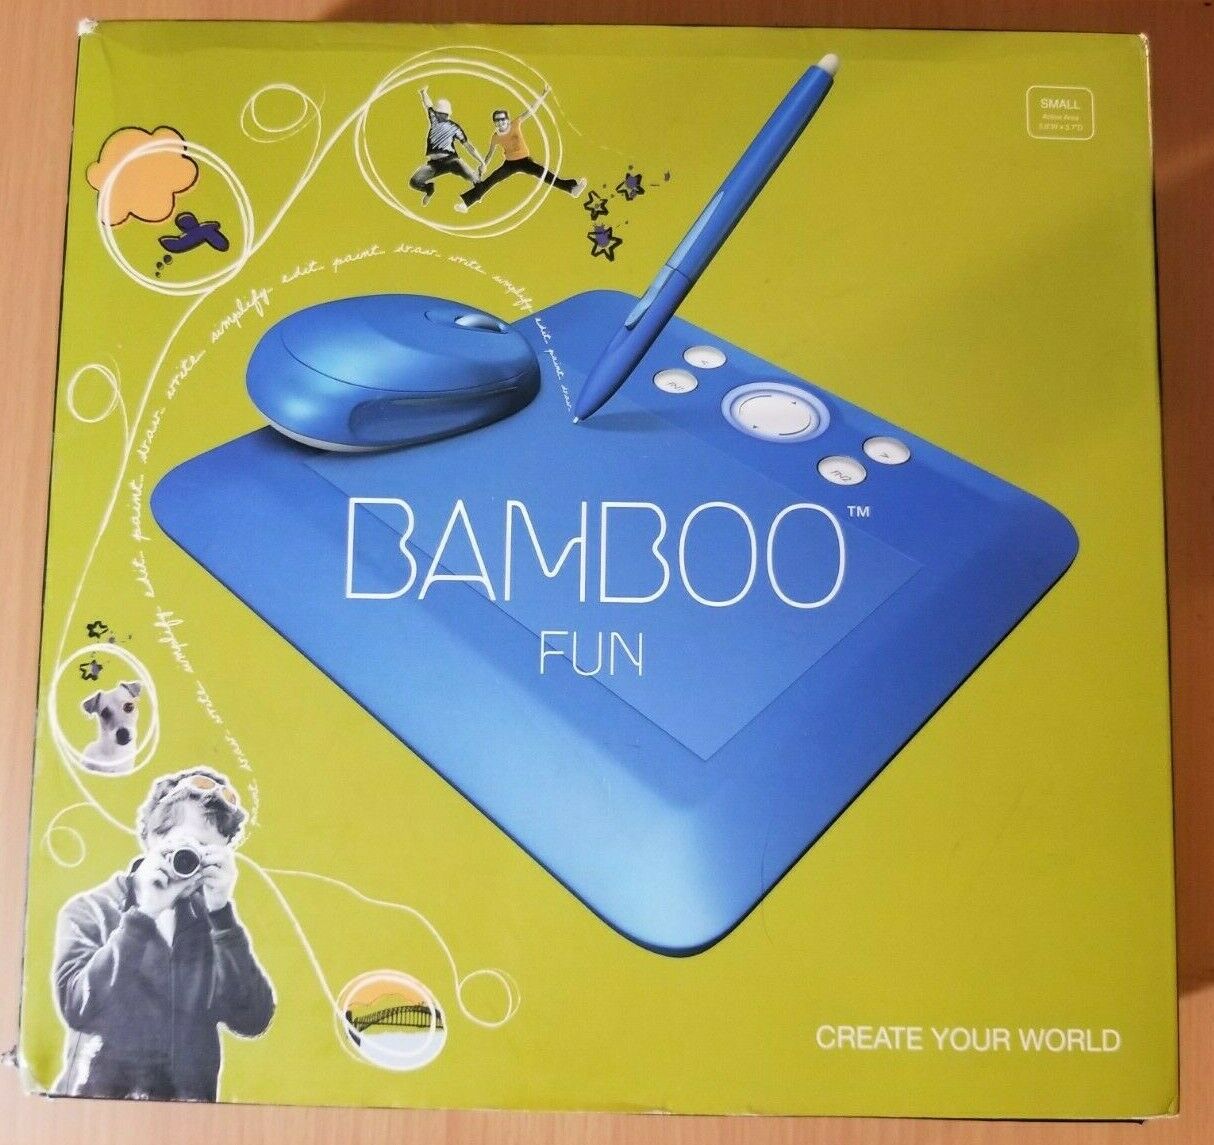 Wacom Bamboo Fun CTE450B drawing touch pen tablet complete w/ box TESTED